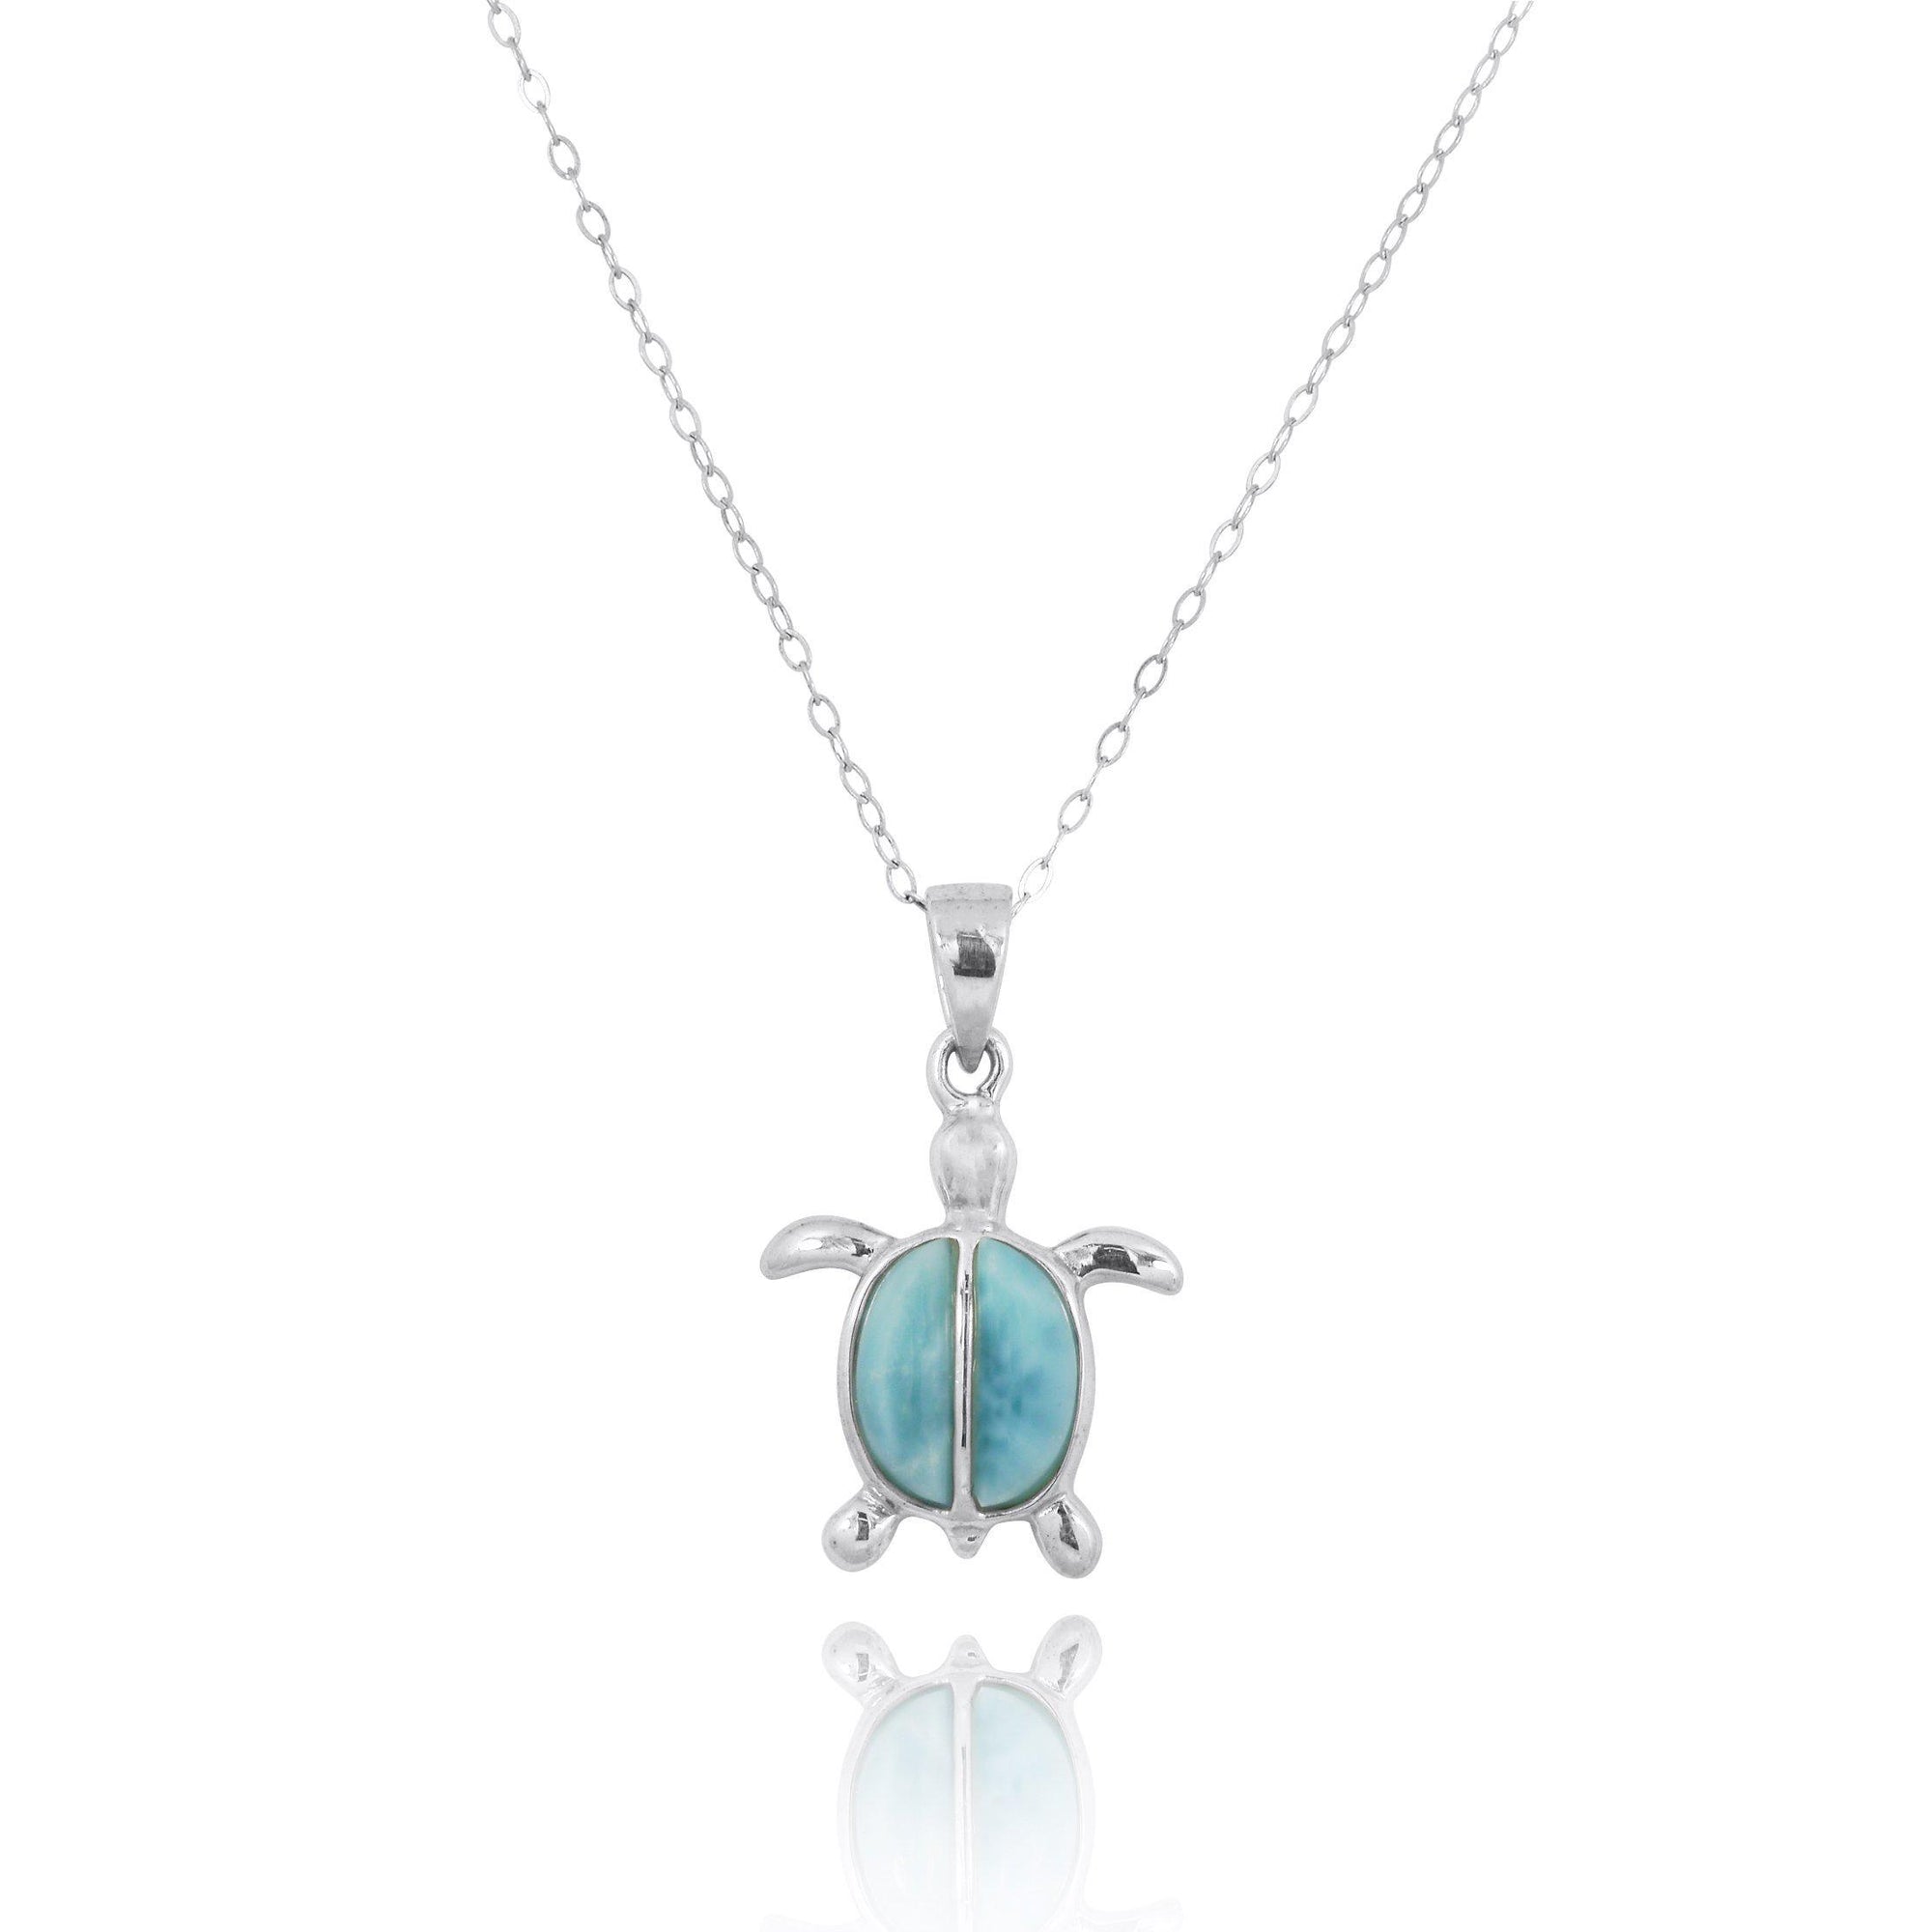 Sterling Silver Turtle Pendant Necklace with Two Larimar Stones